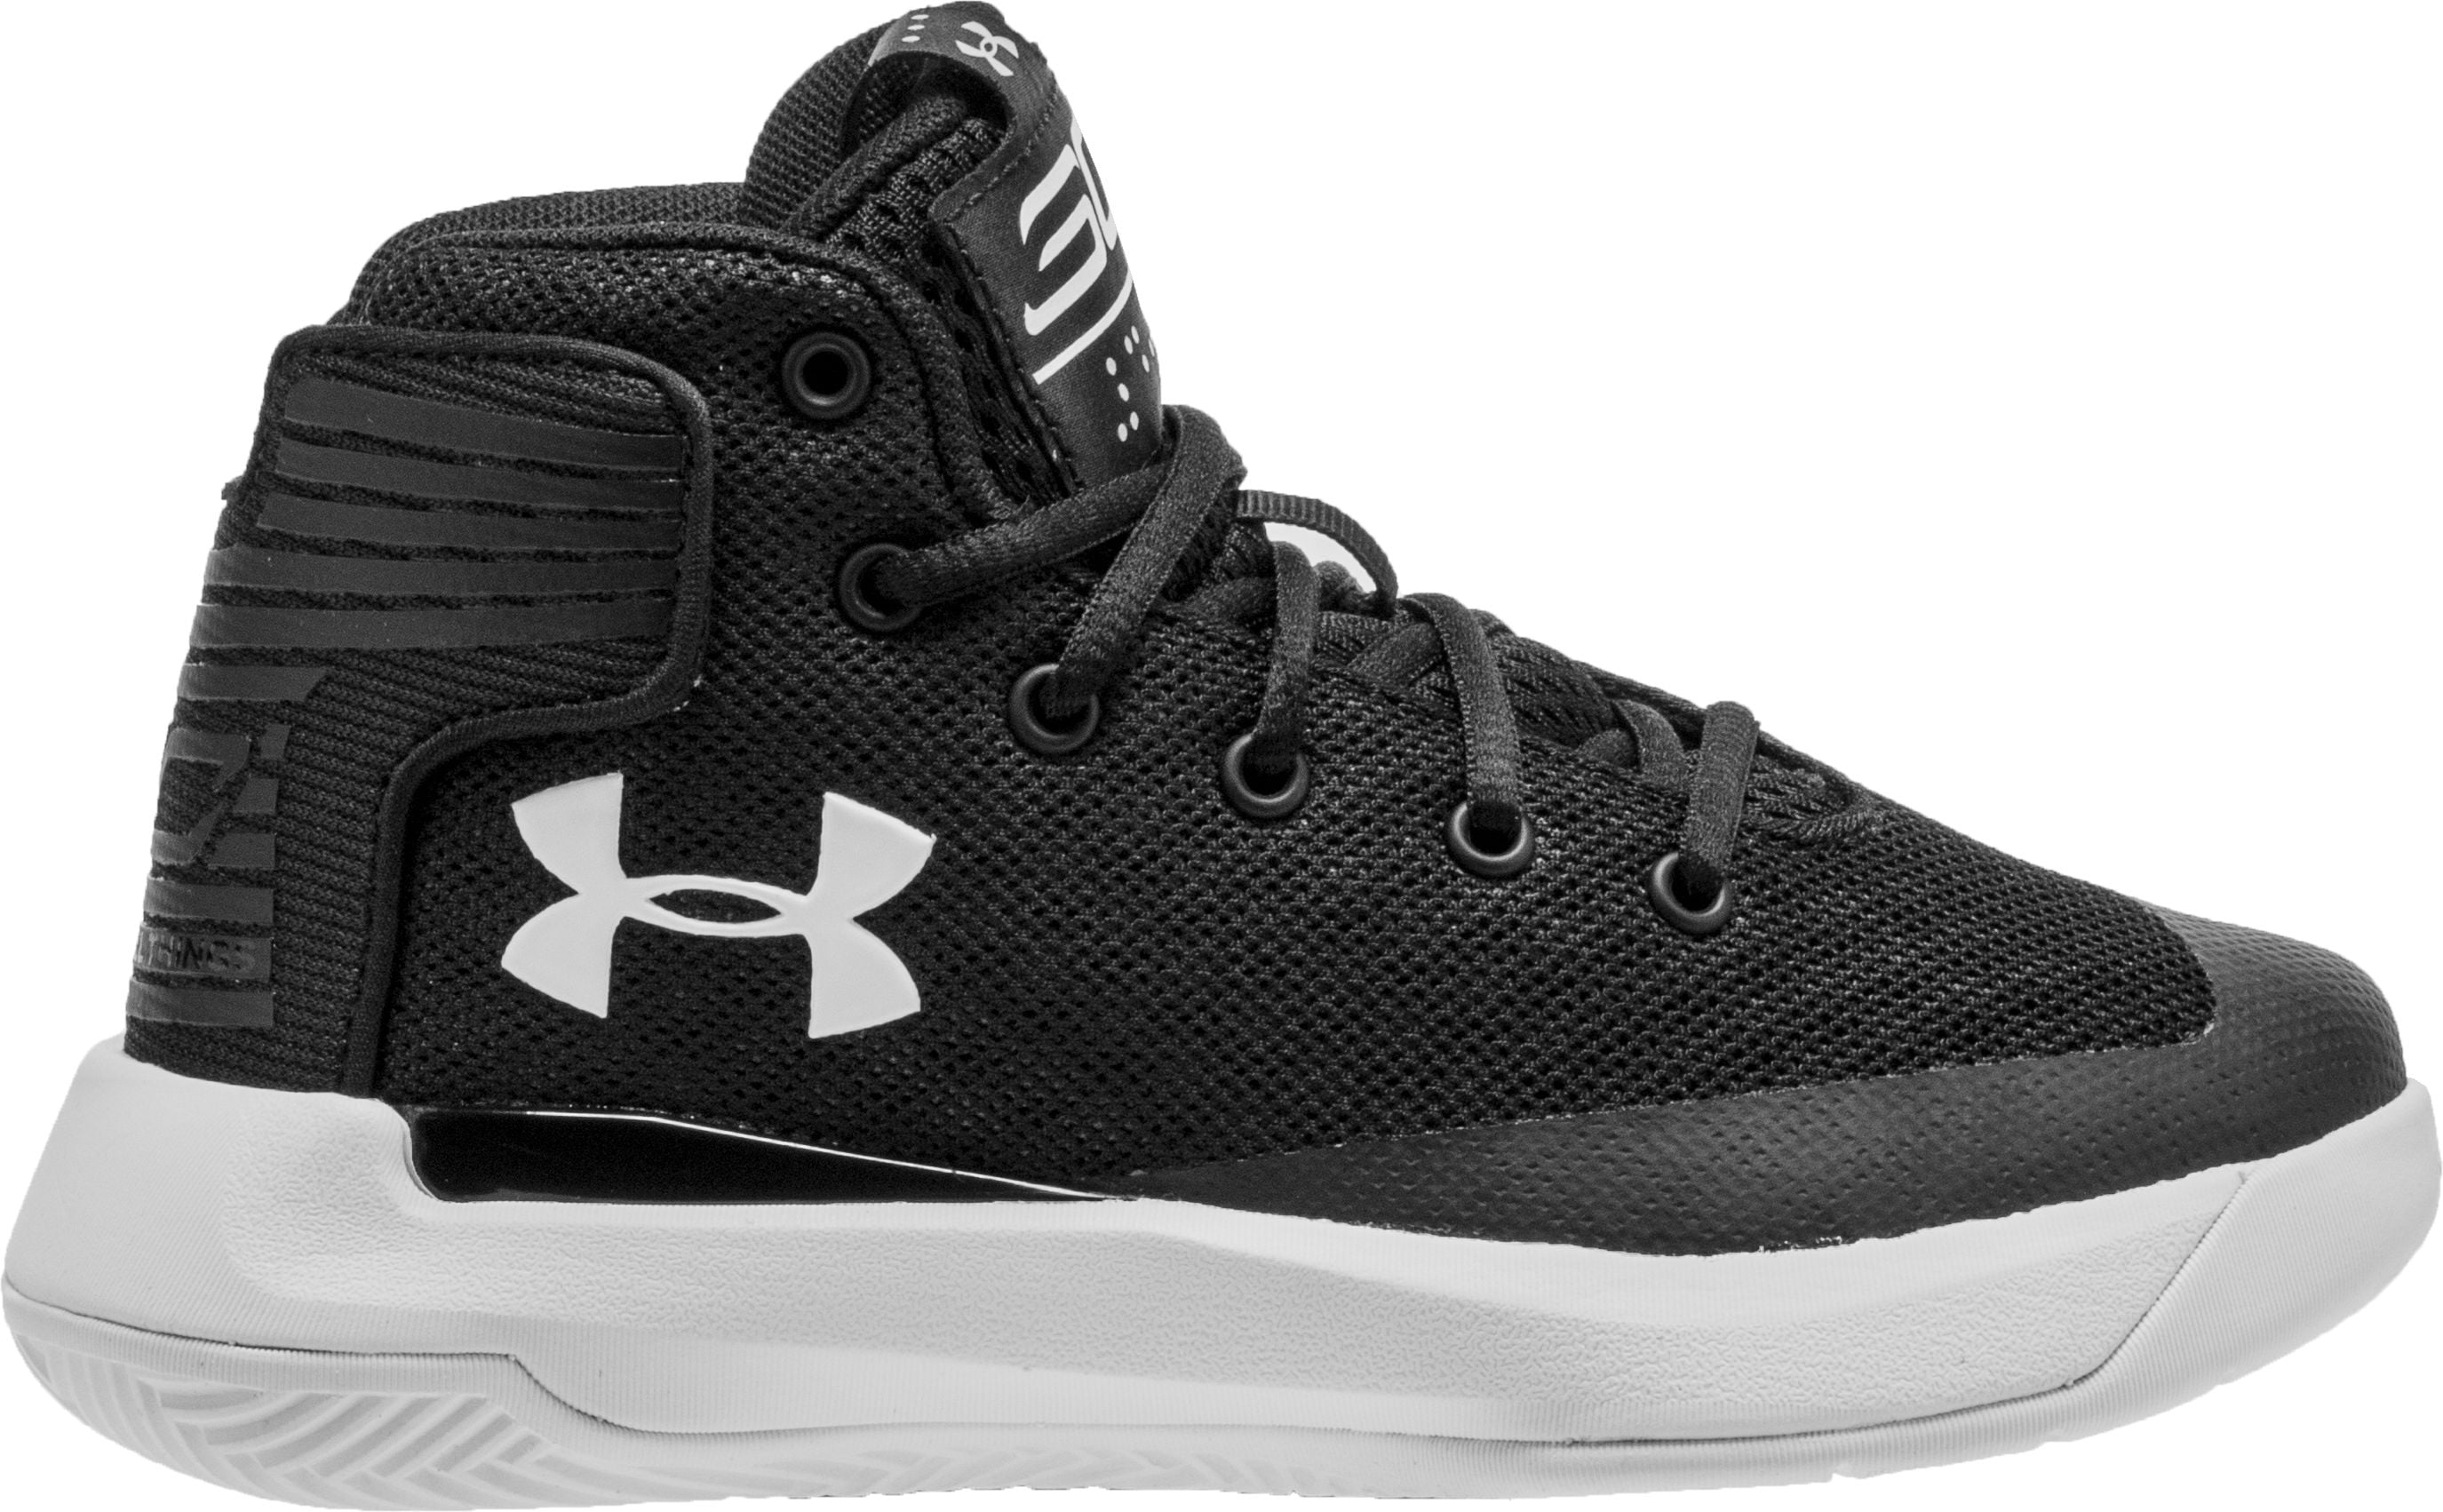 Blush pink Steph curry under armour shoes size 9  Curry under armour  shoes, Under armour shoes, Wedding sneaker